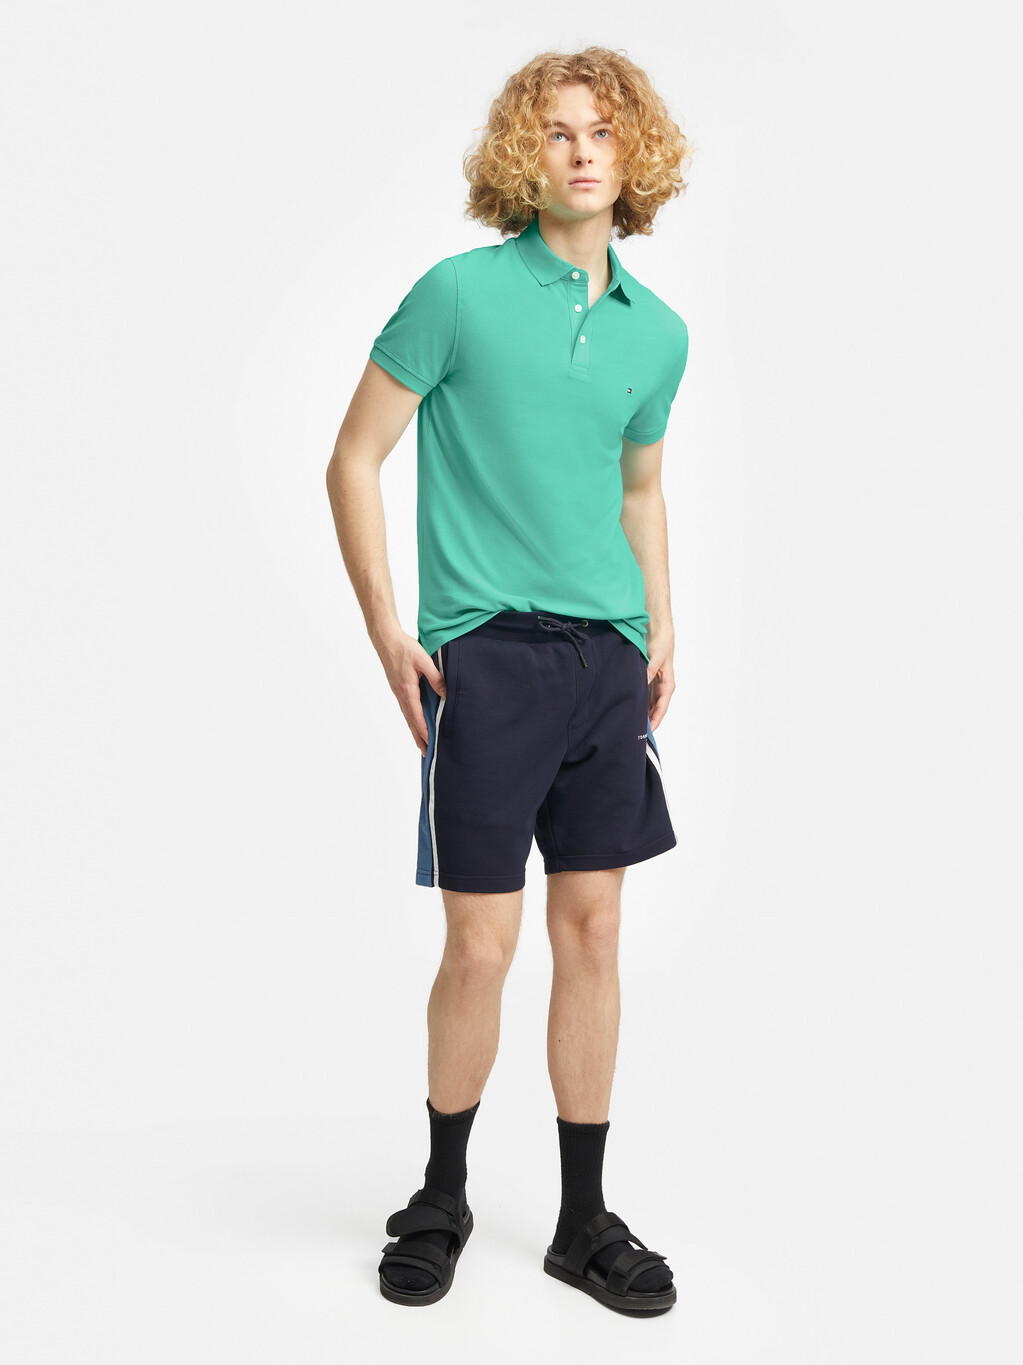 1985 Collection Slim Fit Polo, Light Jade Green, hi-res